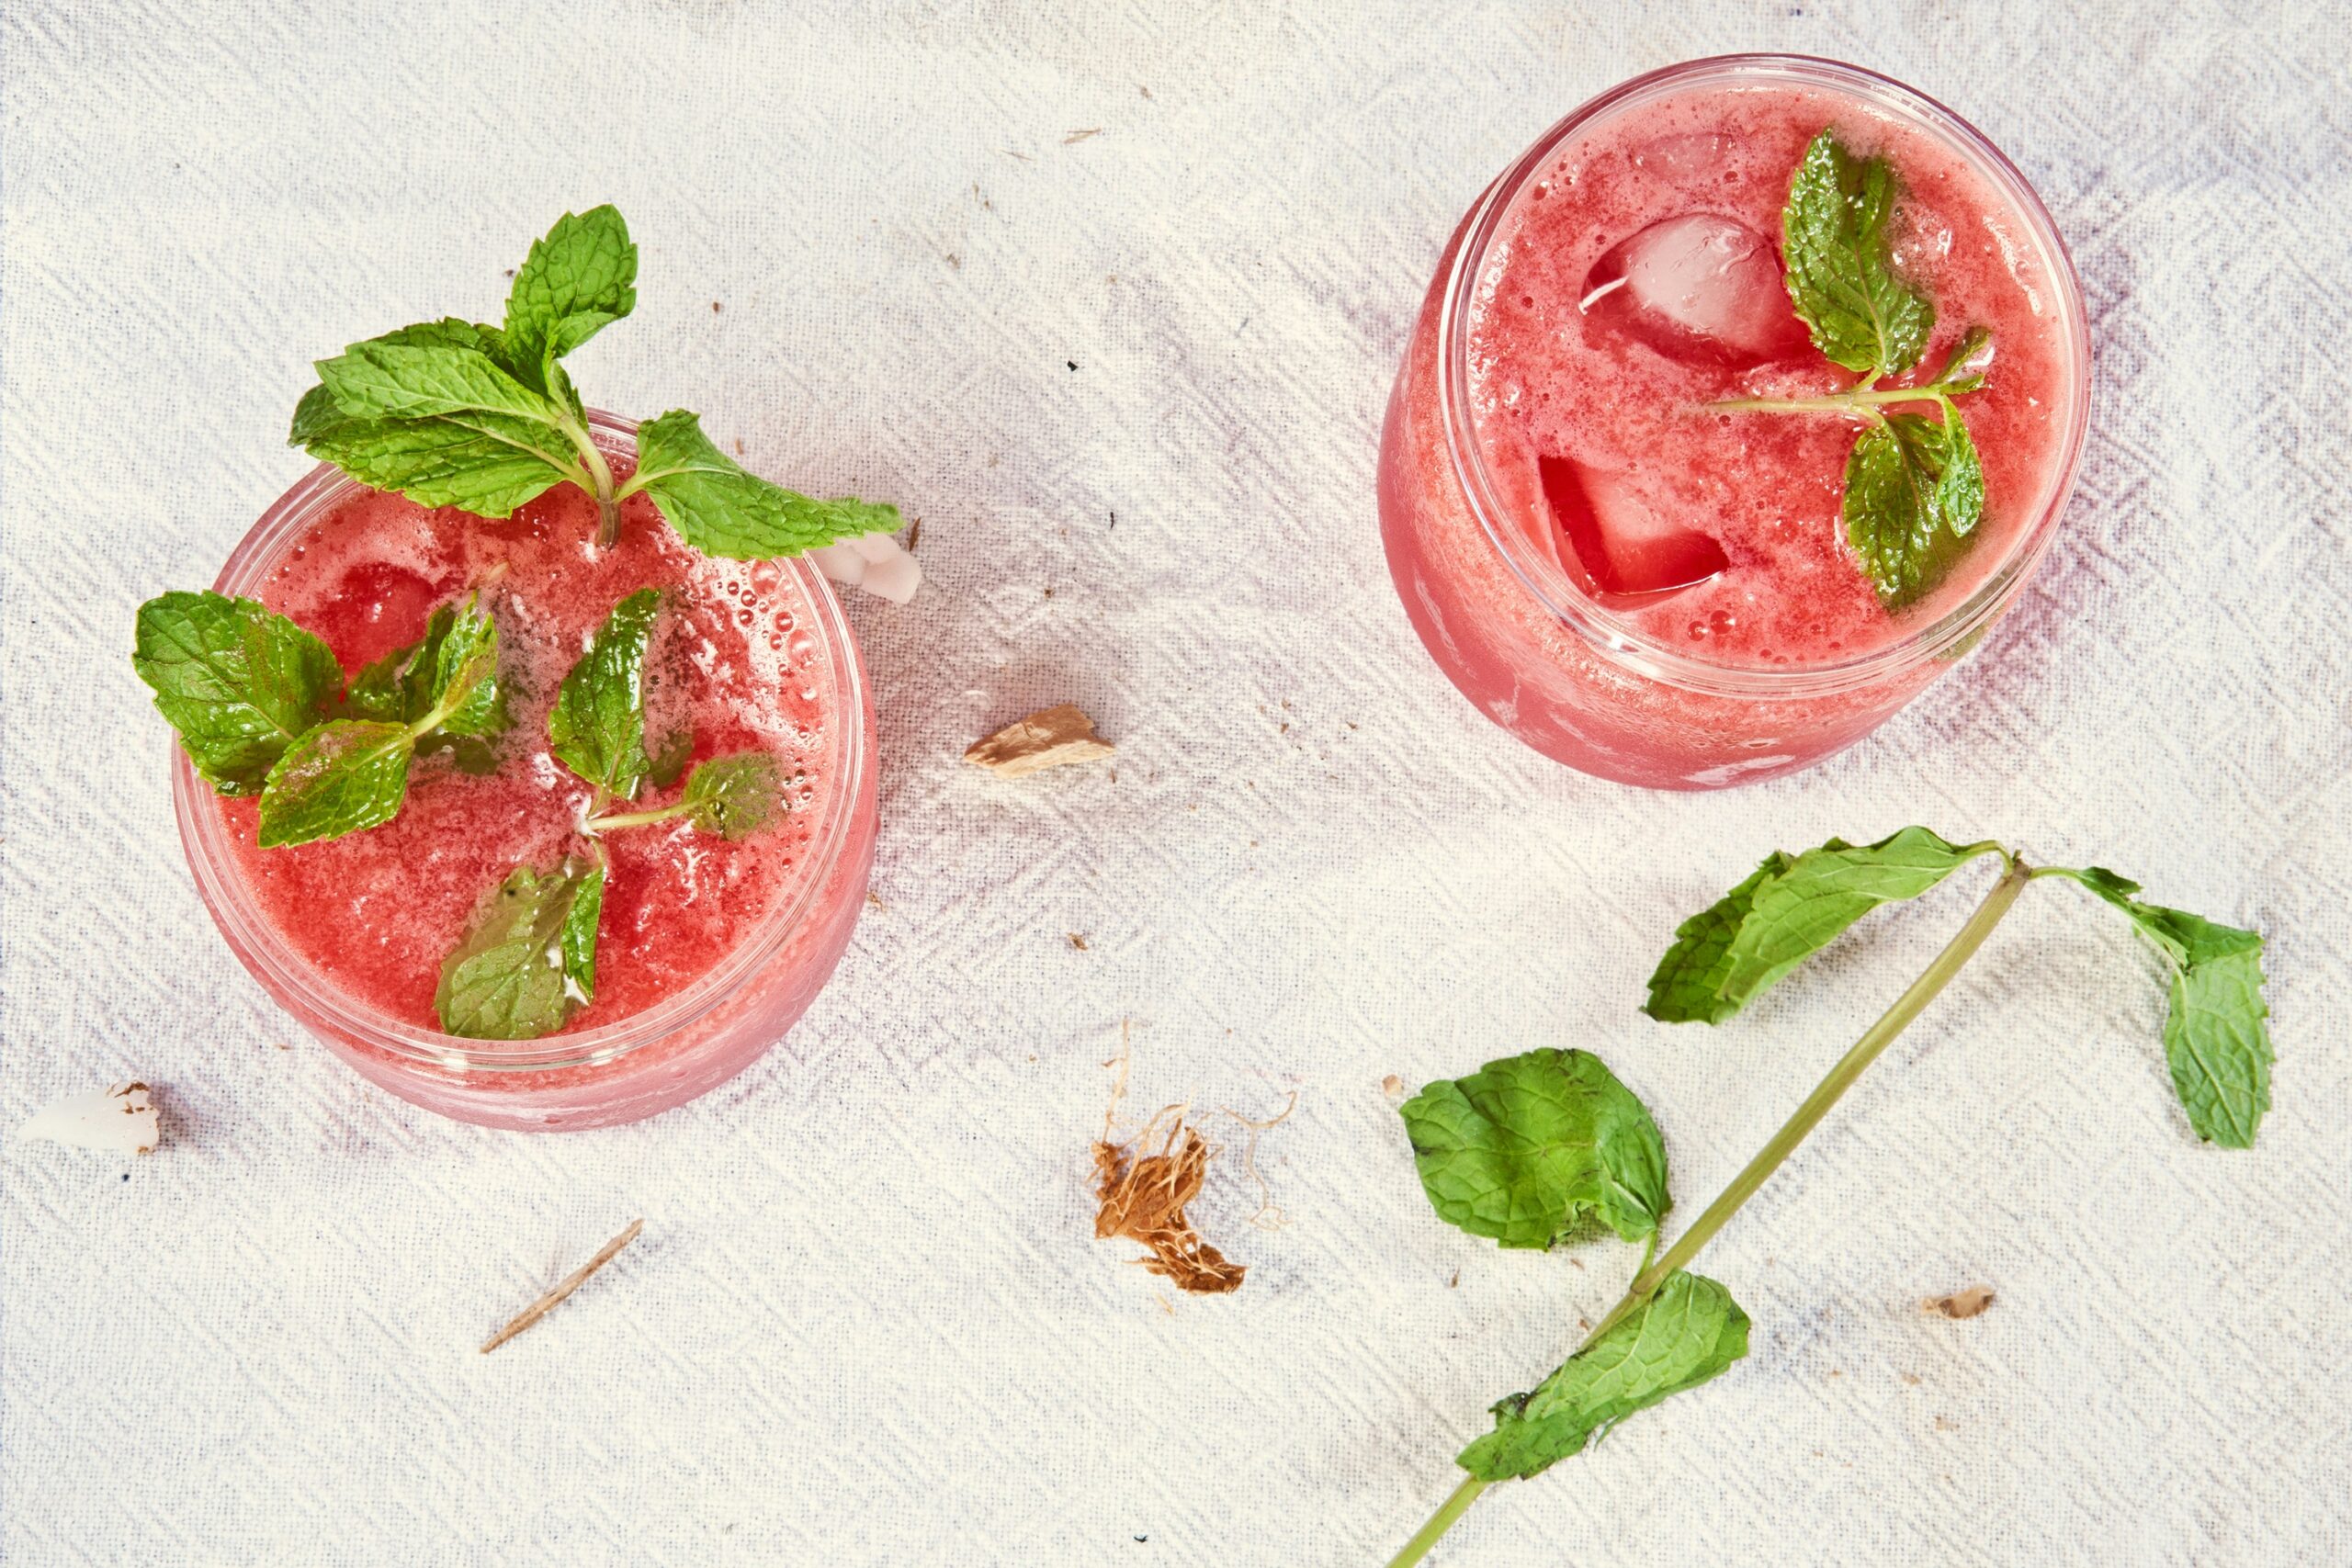 This love mocktail is the perfect Valentine's day drink. Pictured: Strawberry mocktail